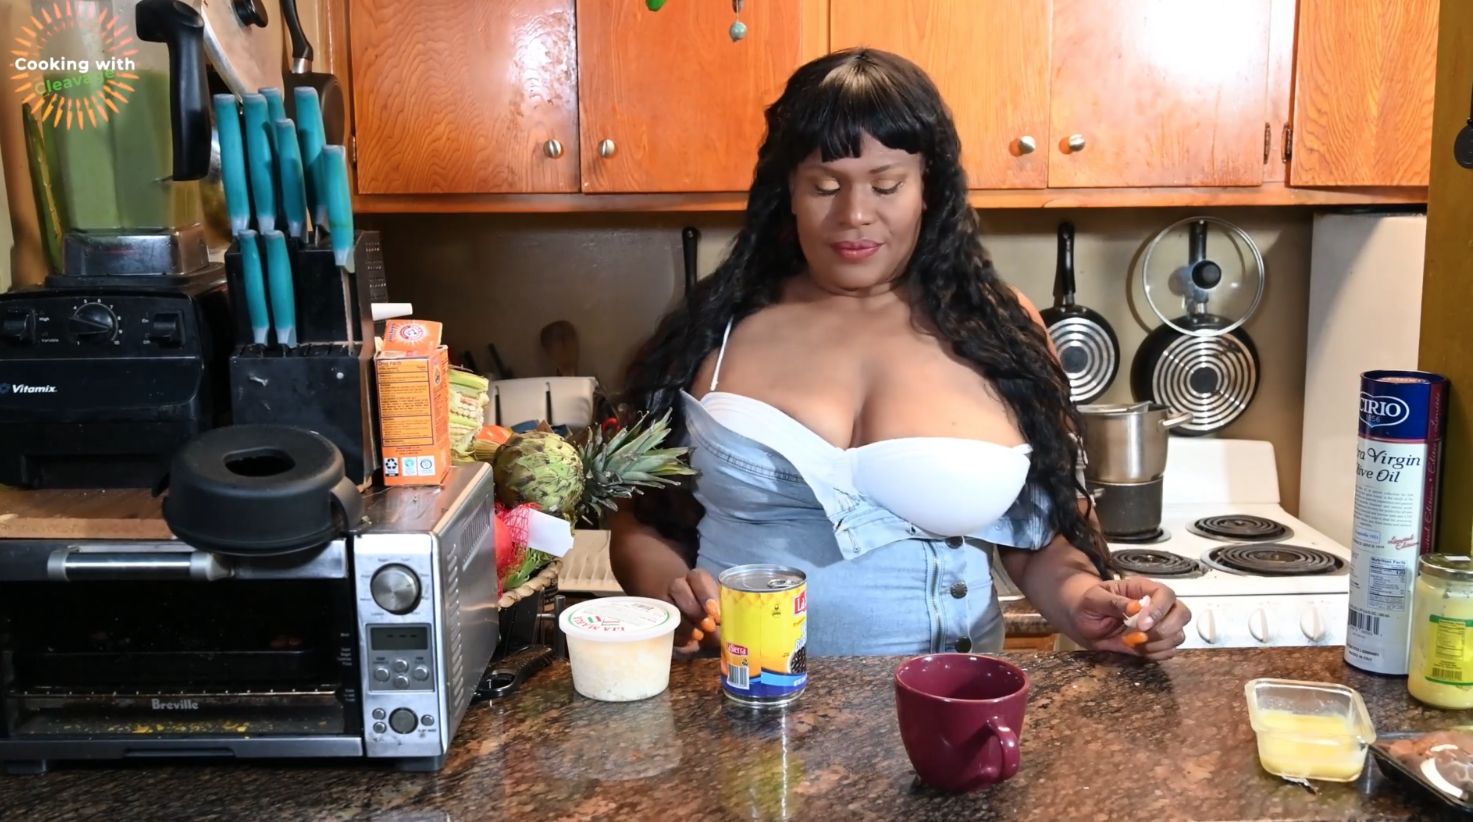 Cooking with cleavage